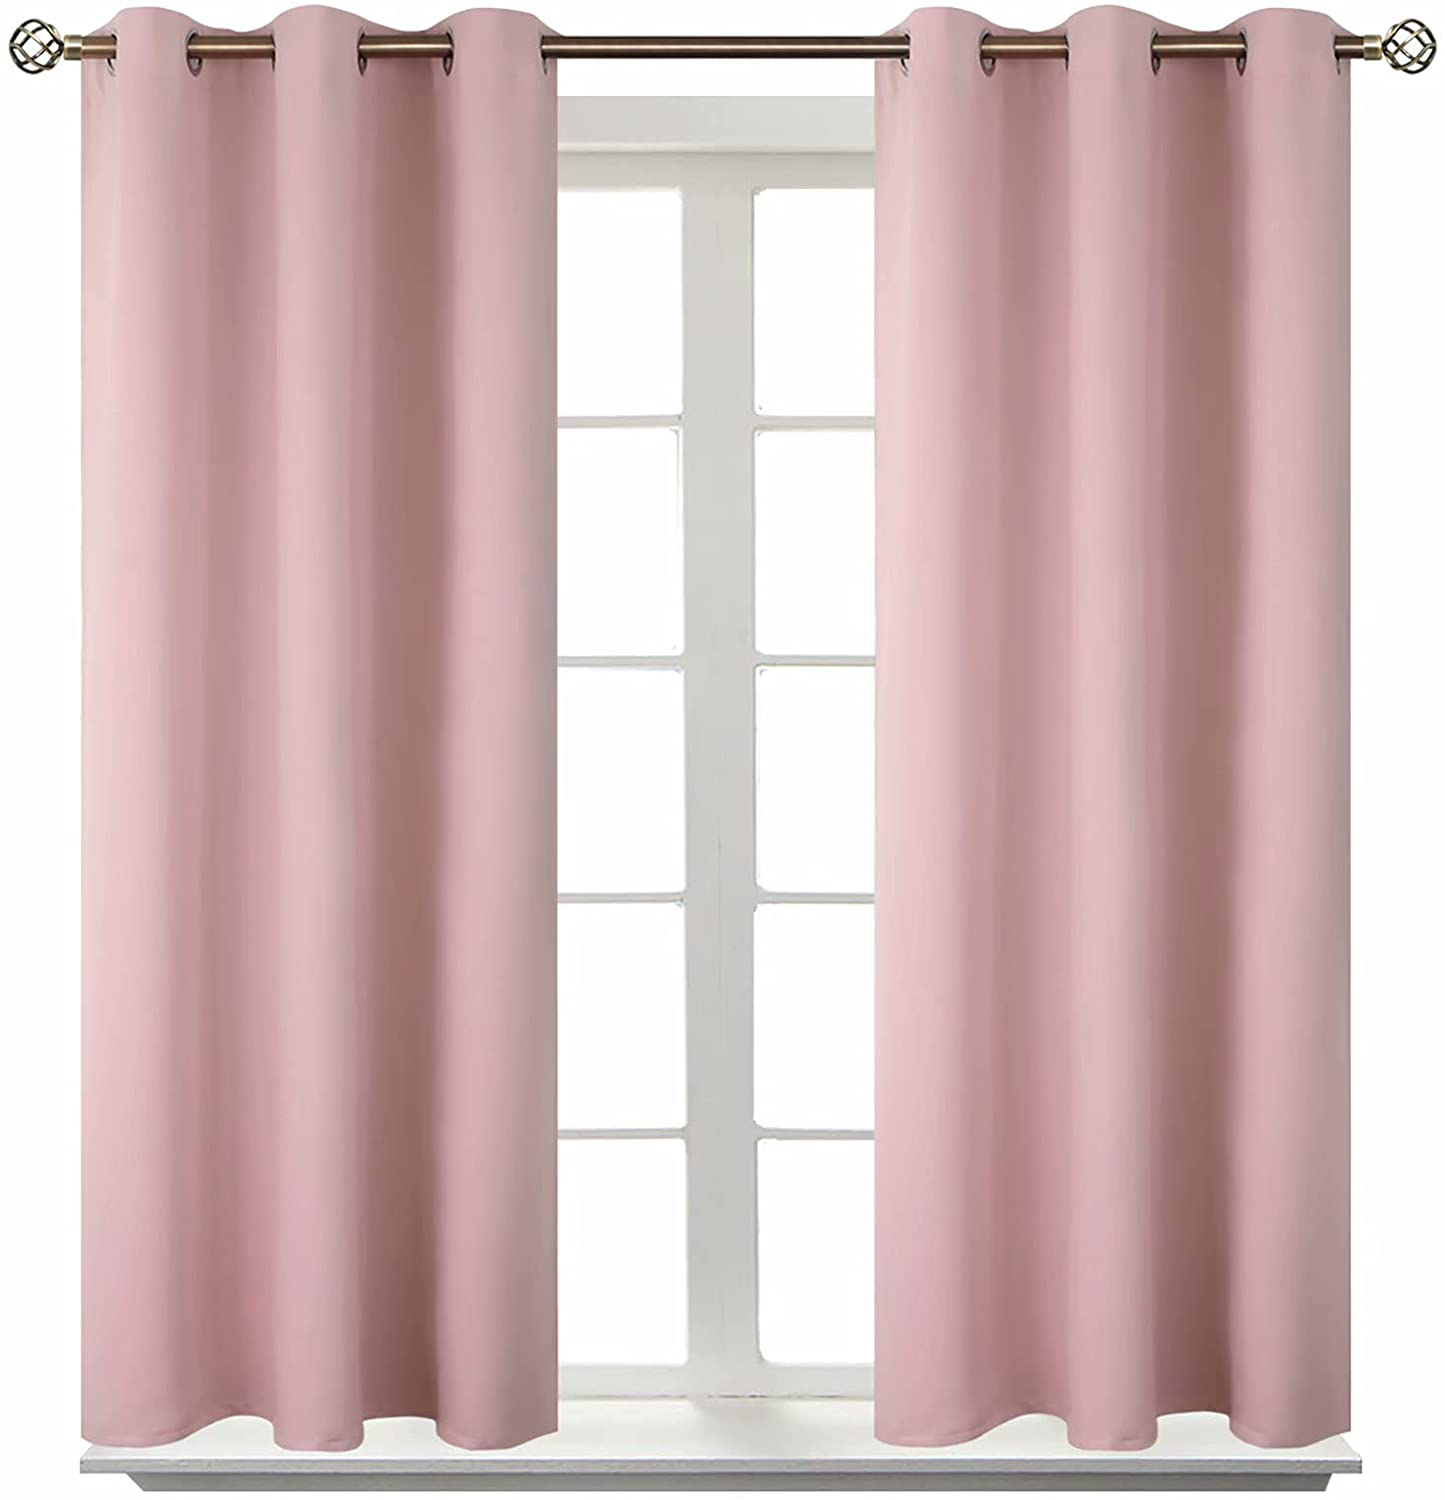 BGment Blackout Curtains - Grommet Thermal Insulated Room Darkening Bedroom and Living Room Curtain, Set of 2 Panels (38 x 45 Inch, Purple)